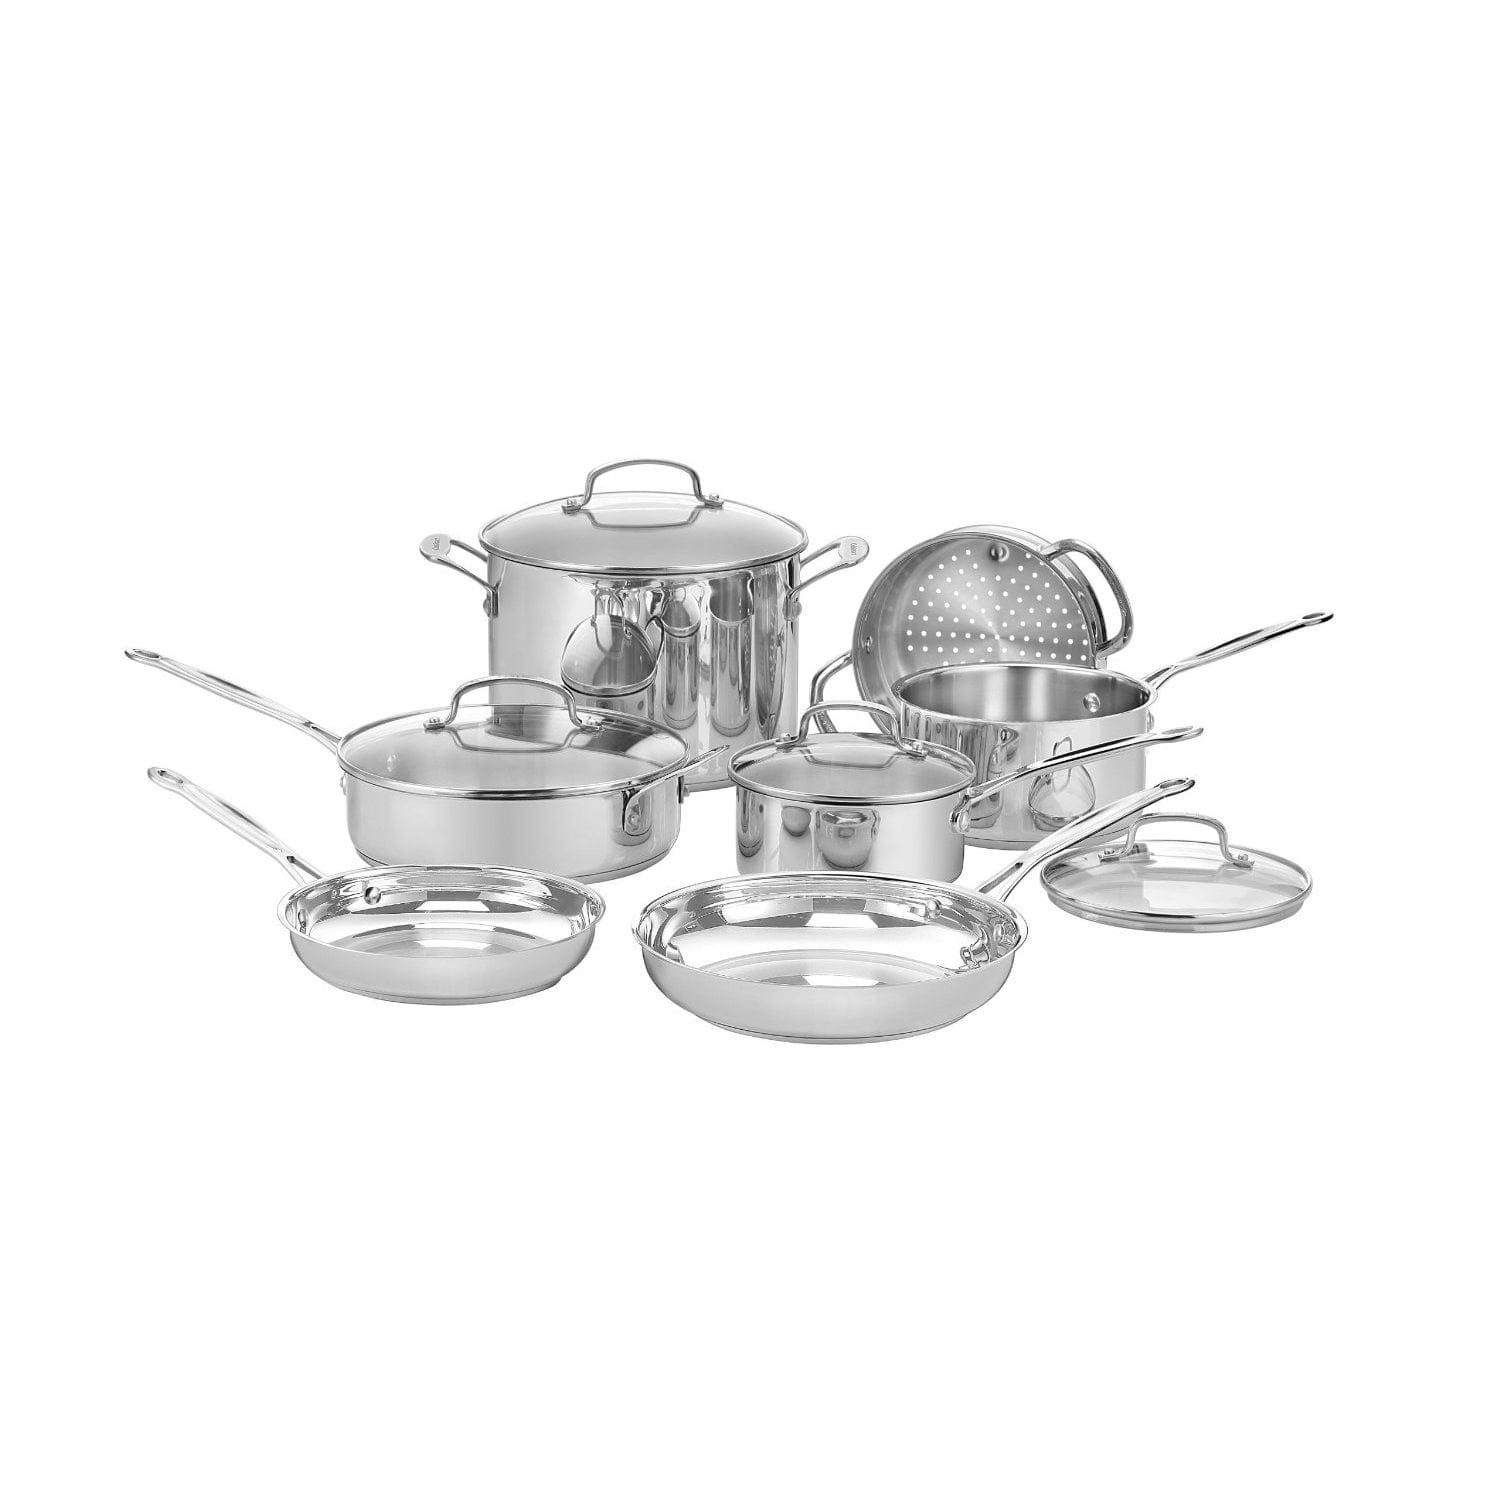 https://ak1.ostkcdn.com/images/products/is/images/direct/8580fb0f7d20168d88b7c825a72739cf500ac1bc/Chef%27s-Classic-Stainless-Steel-11-Piece-Cookware-Set-%2877-11G%29.jpg